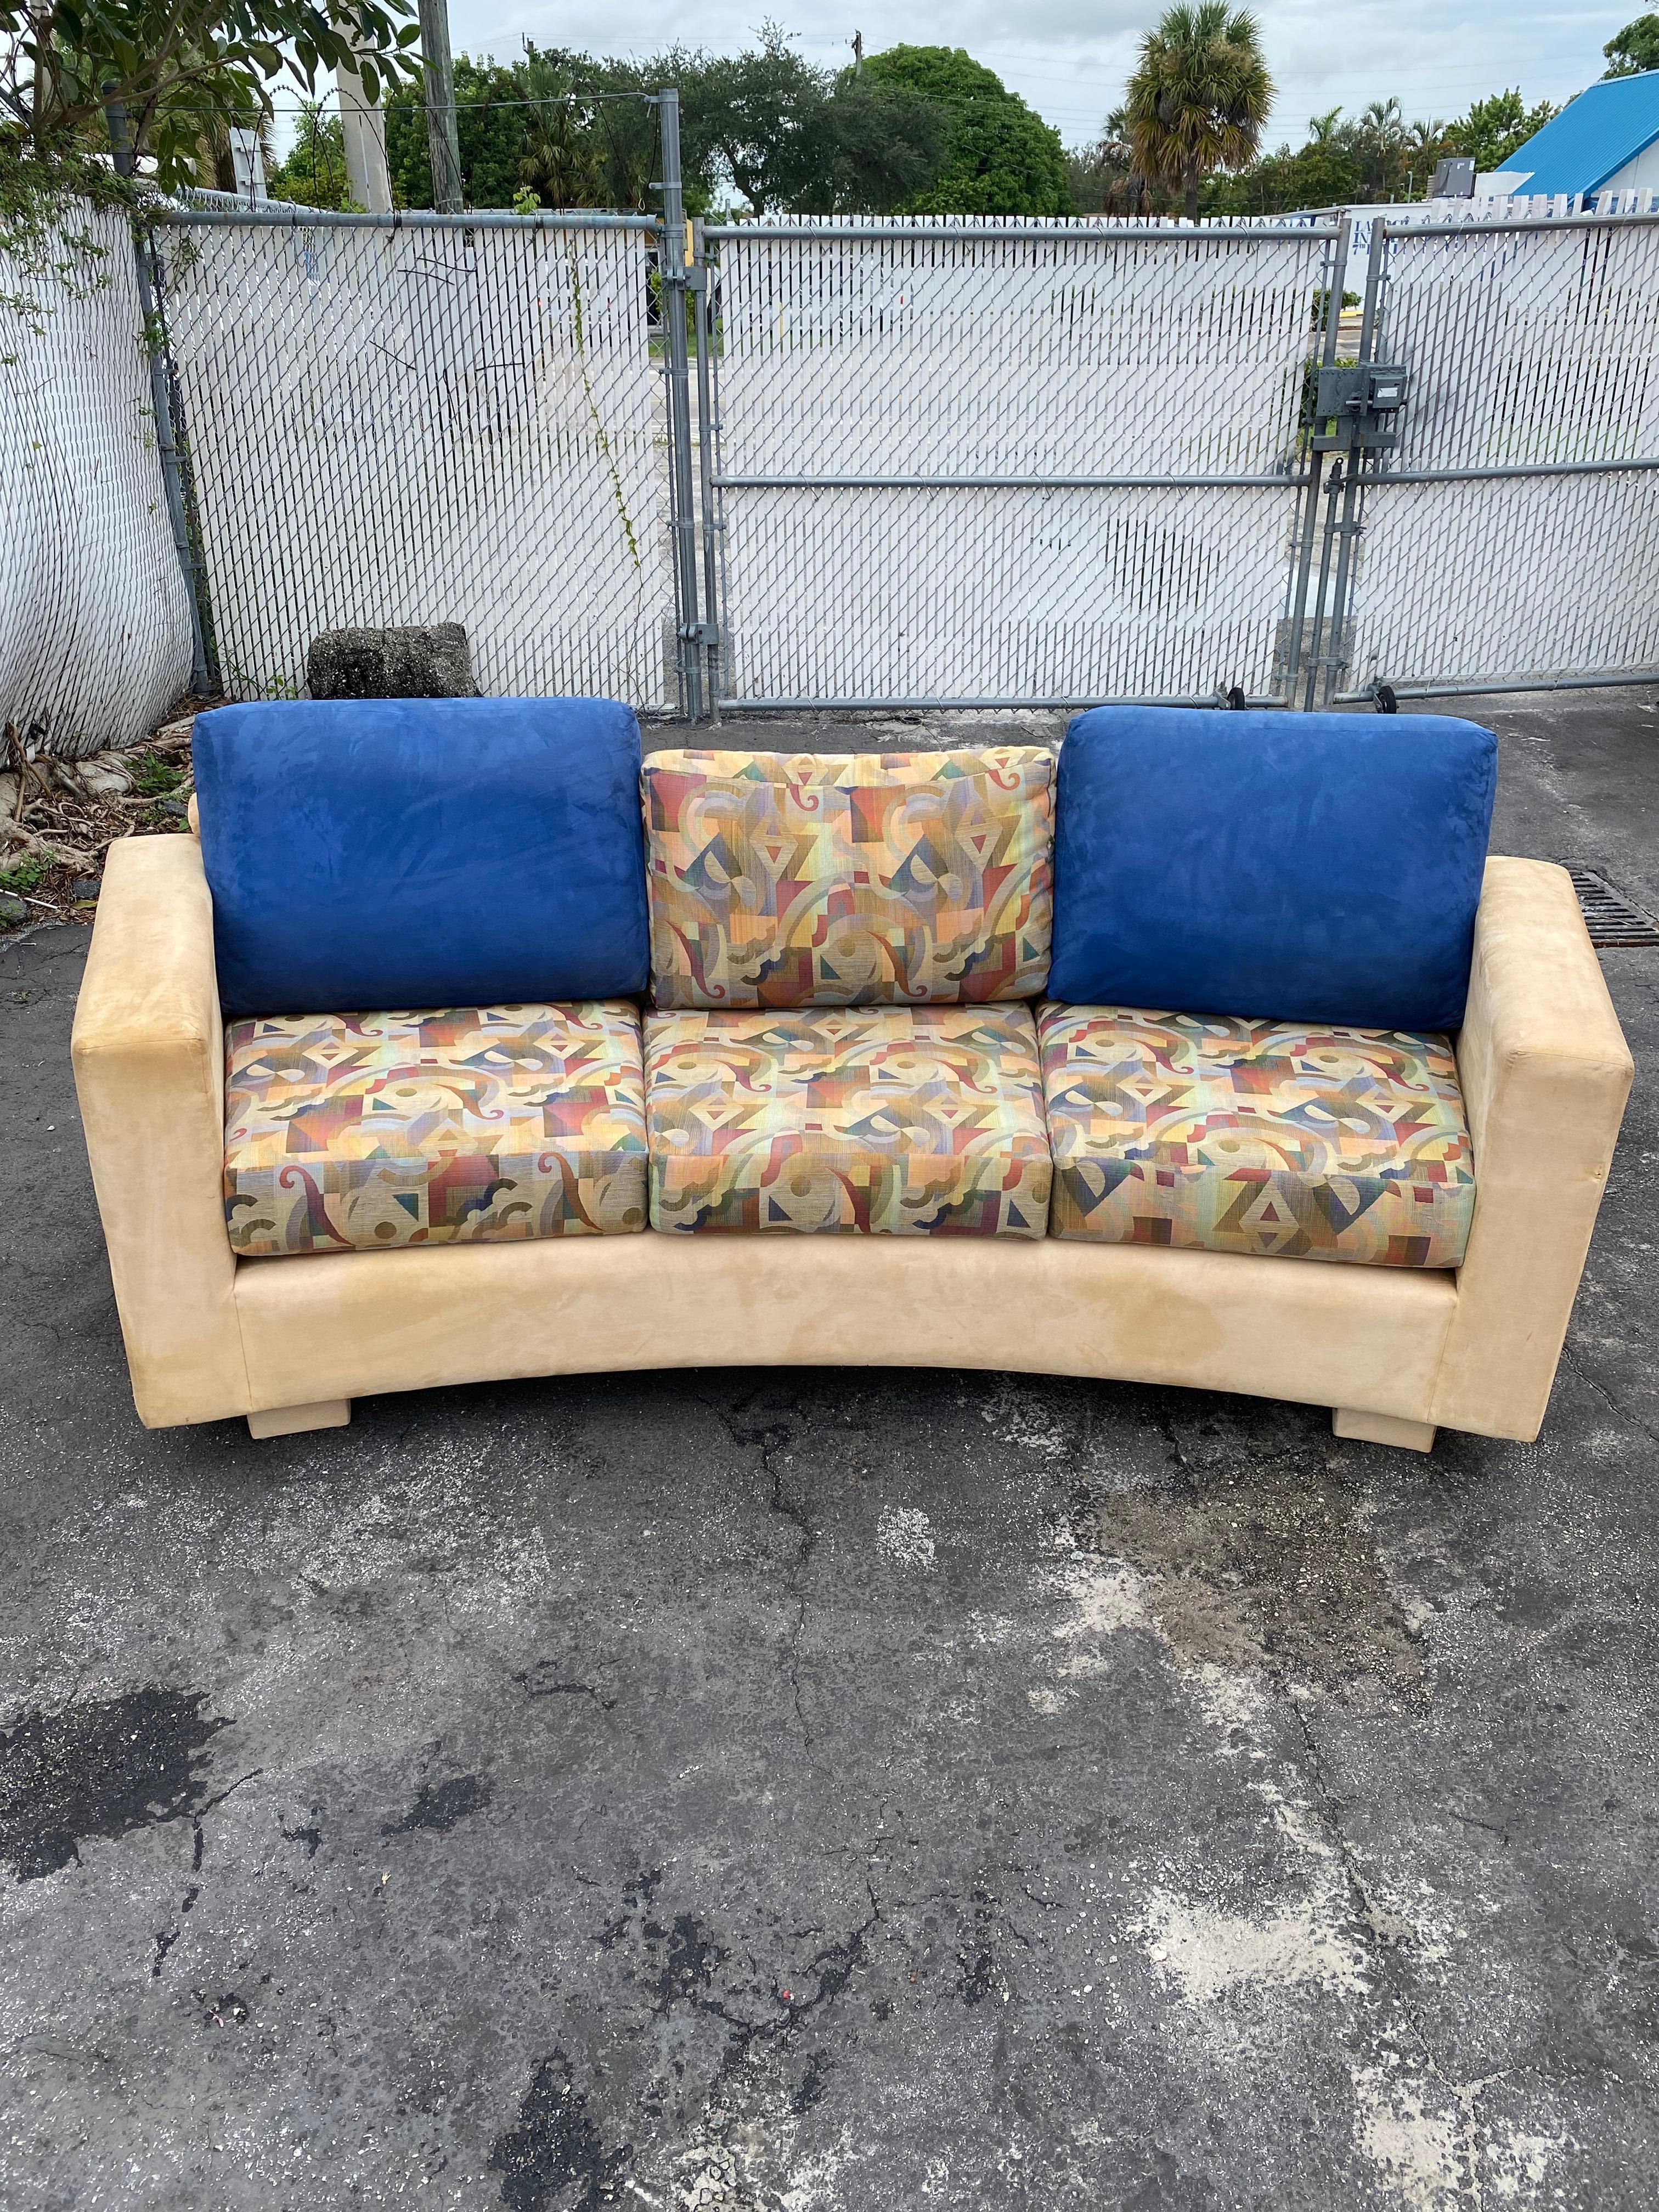 On offer on this occasion is one of the most stunning, curved sofas you could hope to find. This is an ultra-rare opportunity to acquire what is, unequivocally, the best of the best, it being a most spectacular and beautifully-presented sofa set.